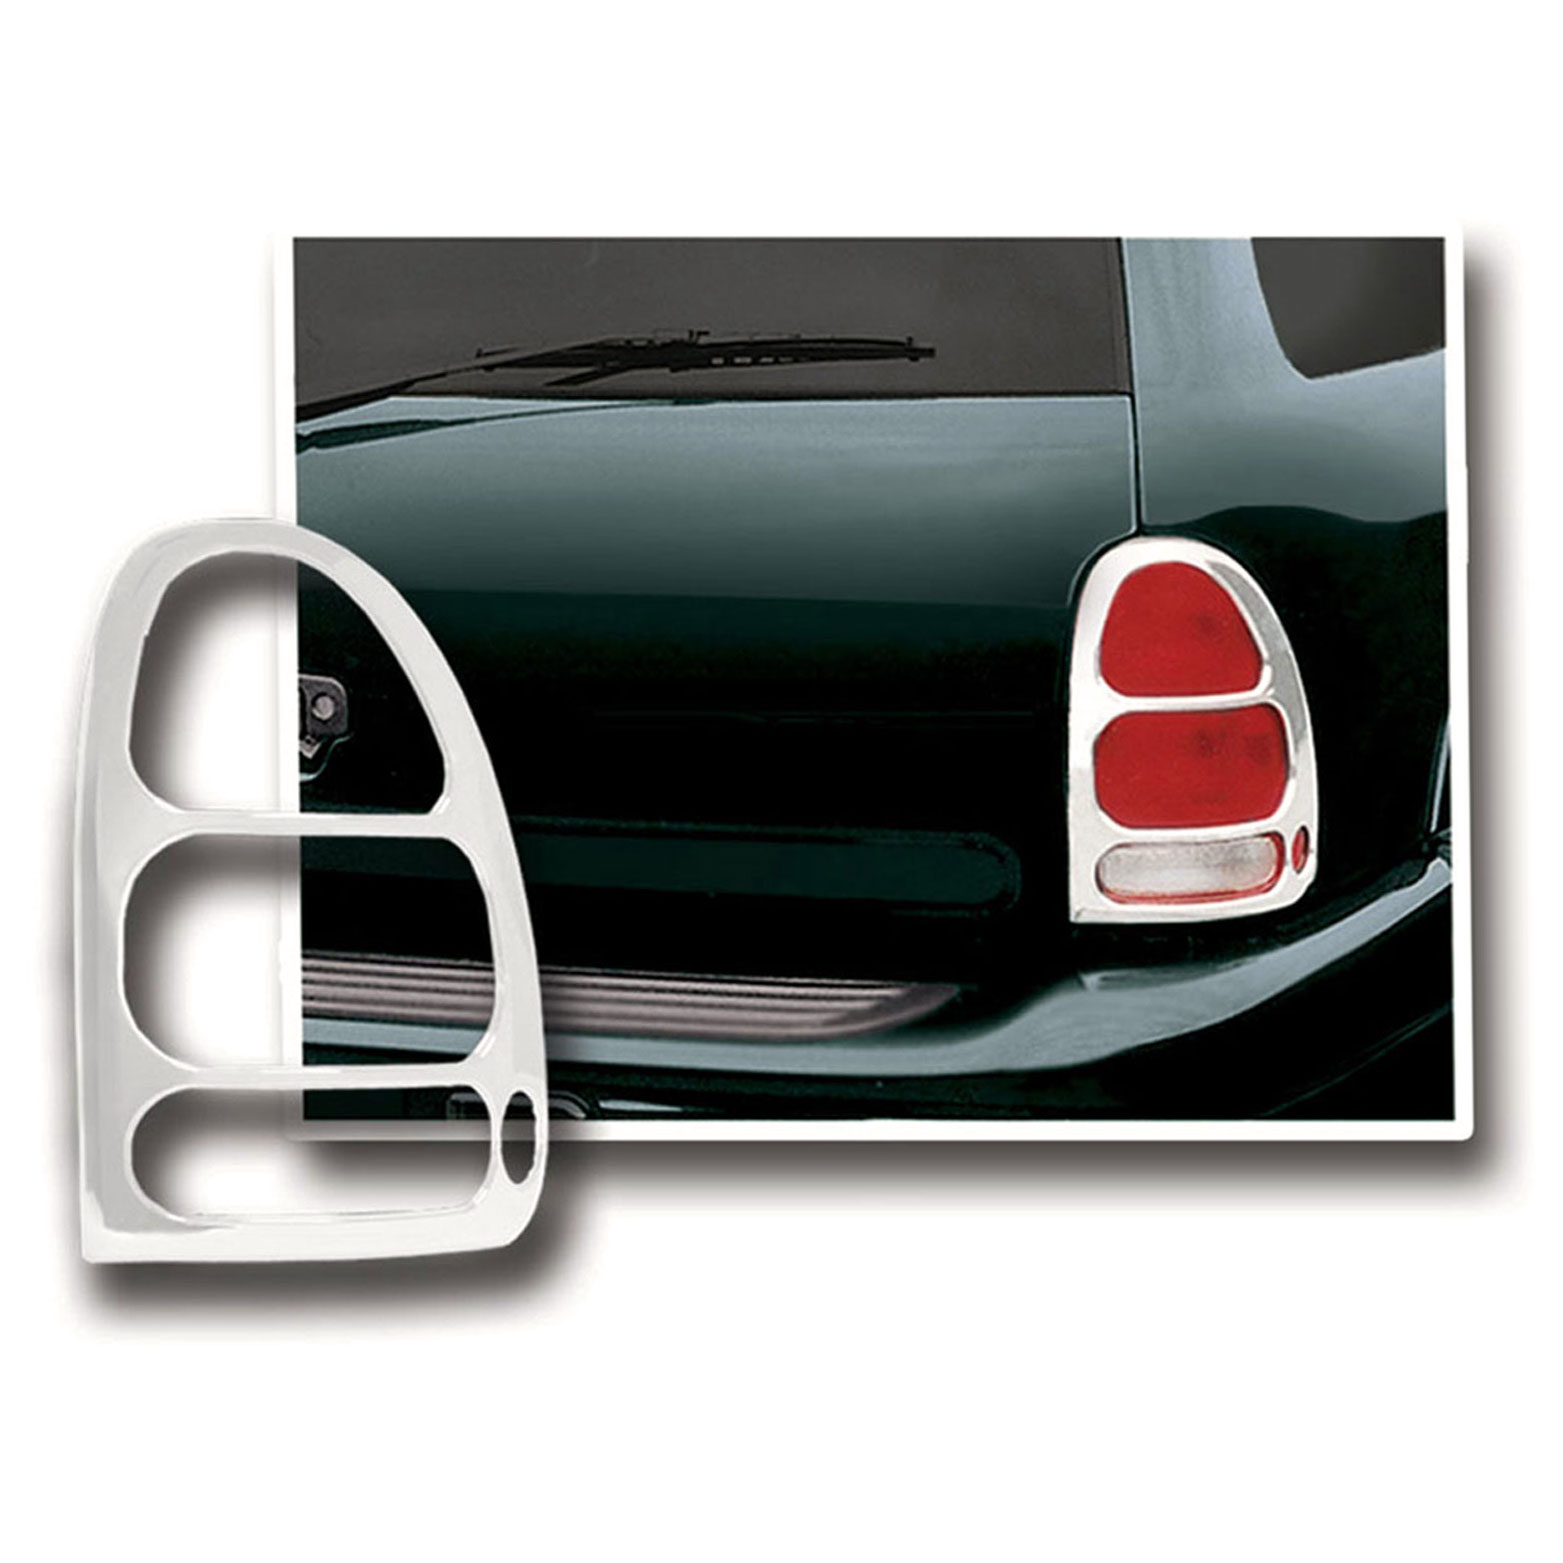 Tail Light Bezels for 1996-2000 Chrysler Town & Country [Chrome] Premium FX | eBay Chrysler Town And Country Tail Light Cover